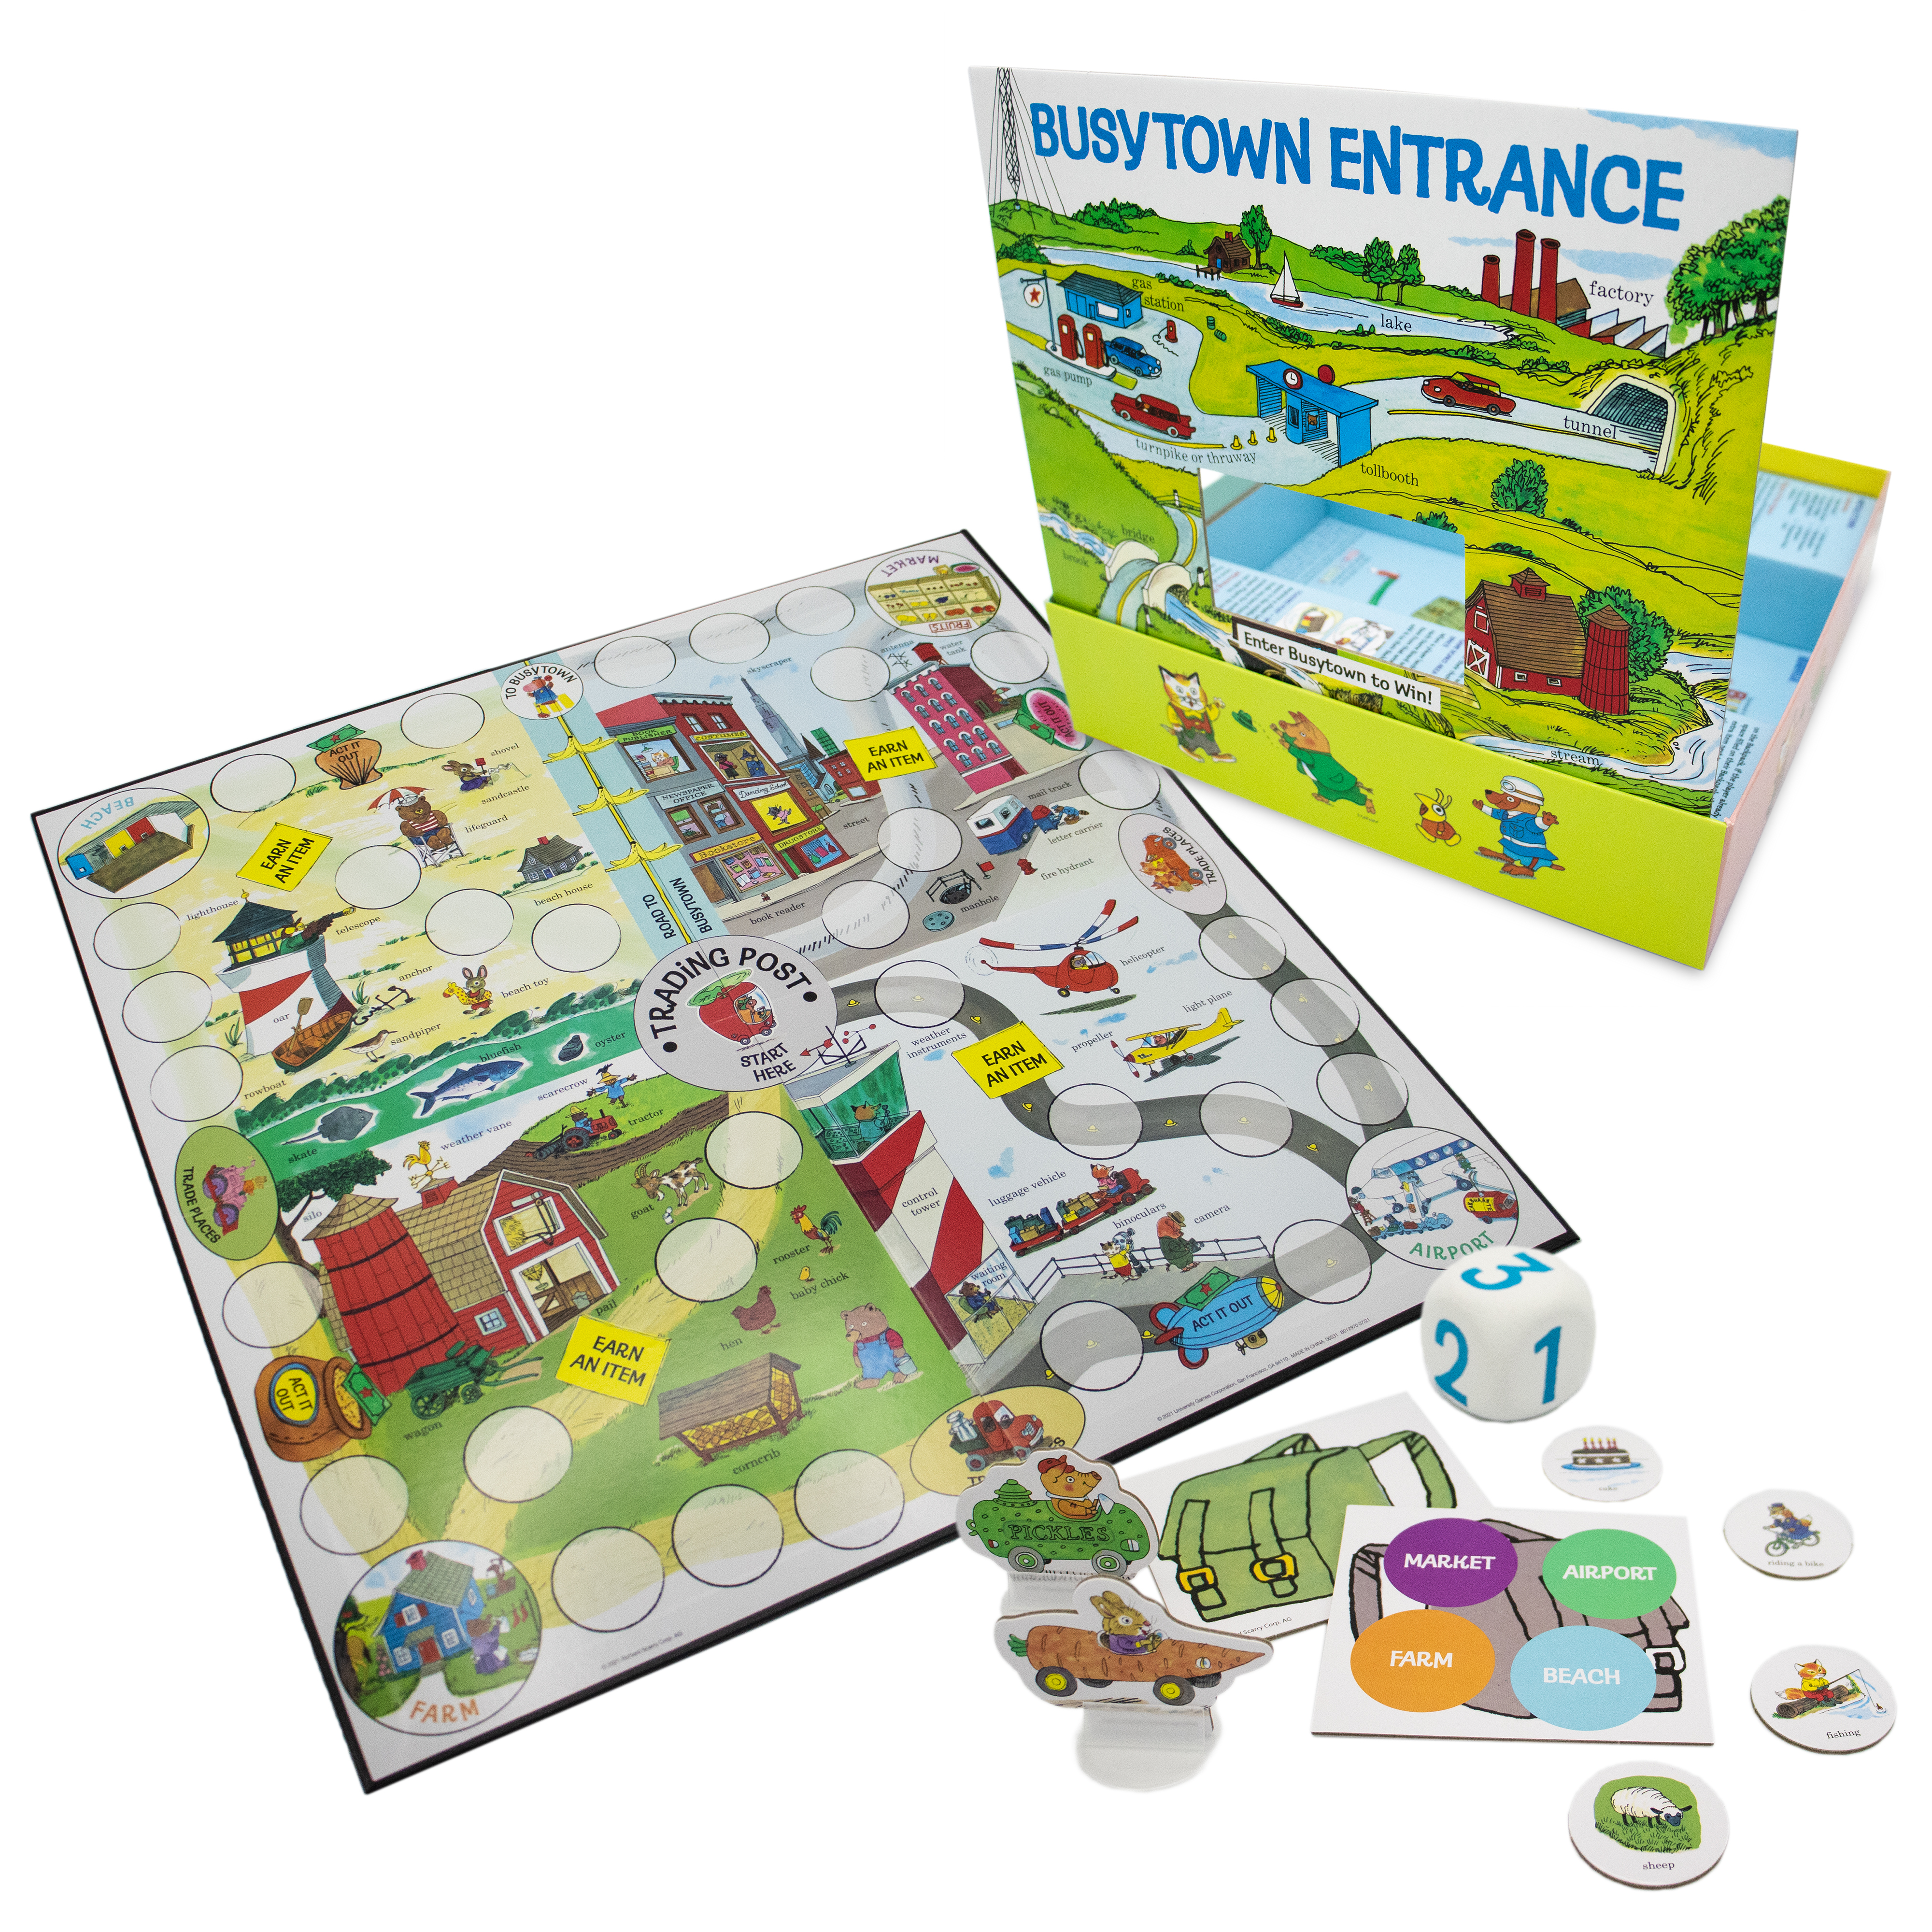 Richard Scarry's Busy Day Game